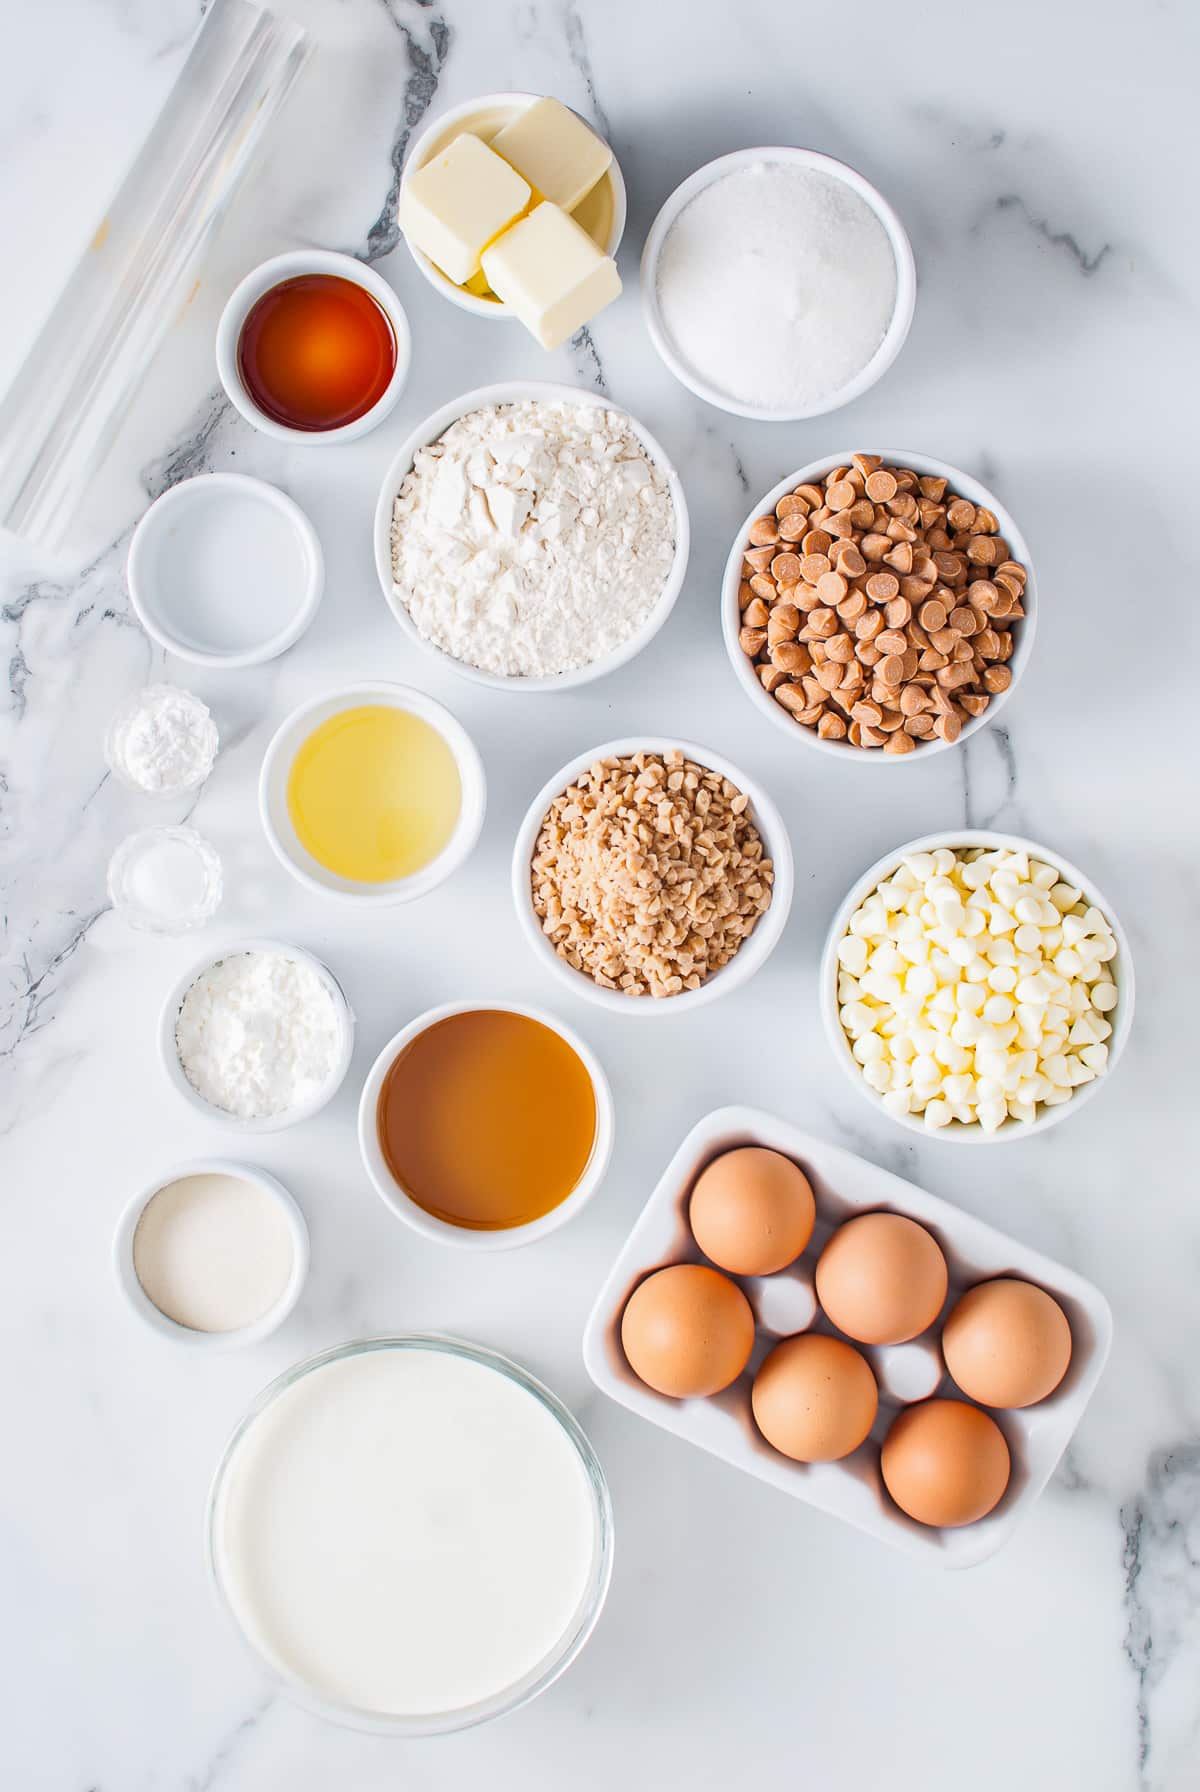 Overhead image of ingredients needed to make white chocolate mousse cake